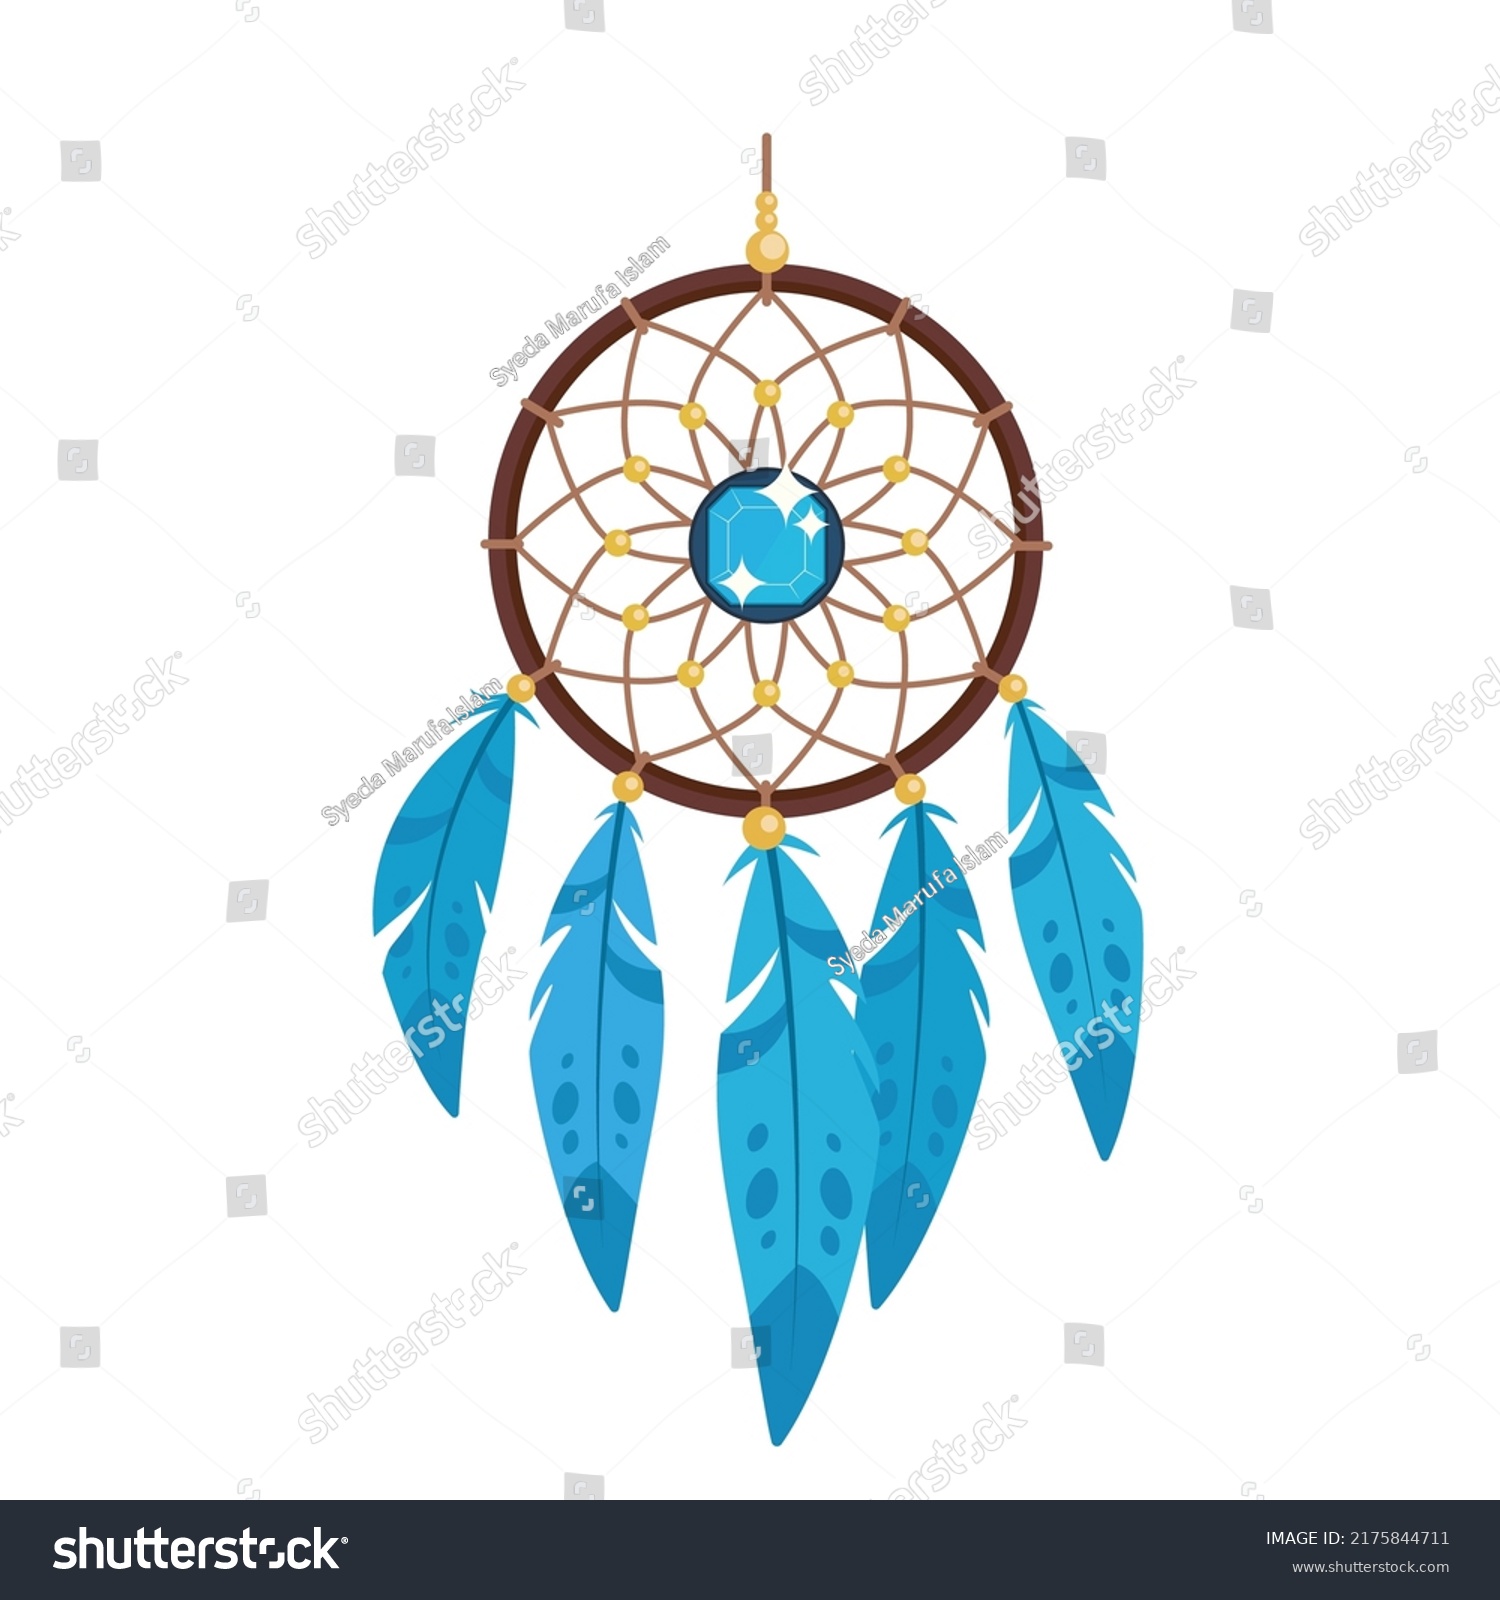 SVG of Vector cartoon style illustration of dream catcher with blue gem inside isolated on white background svg